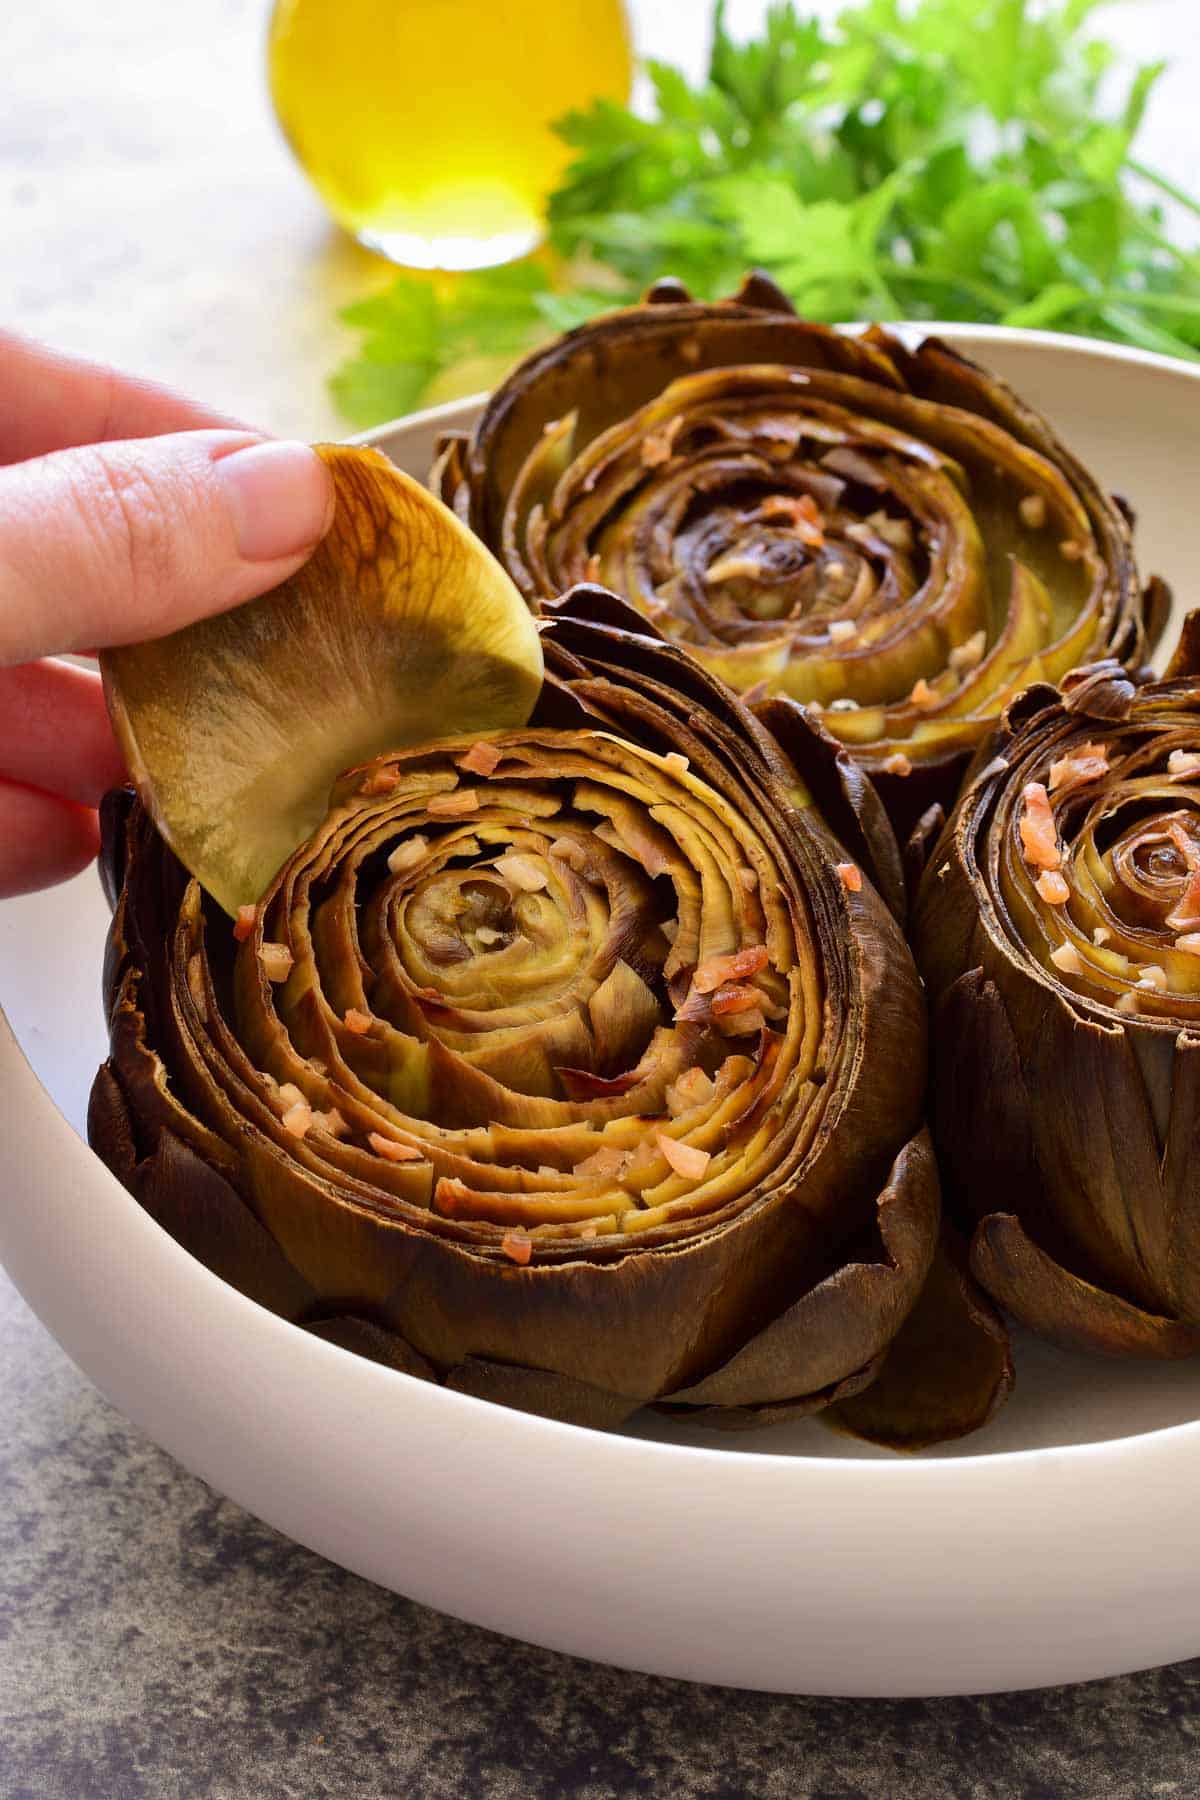 A hand pulling a leaf out of a roasted artichoke in a white bowl.